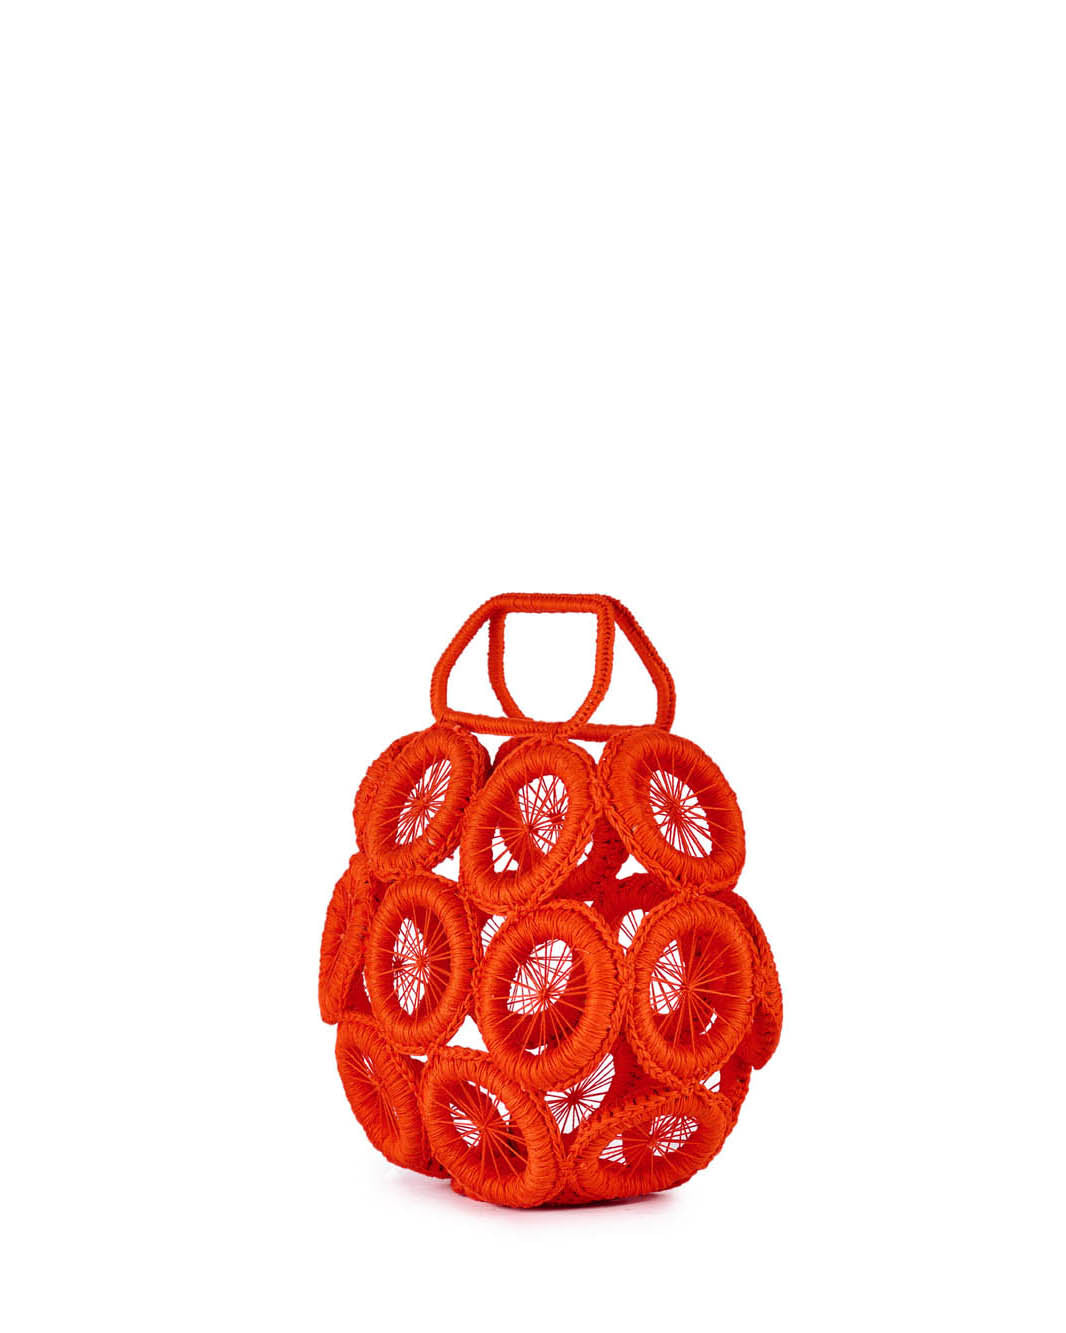 Bright orange circular basket bag made from knotted rope with open design on a plain white background